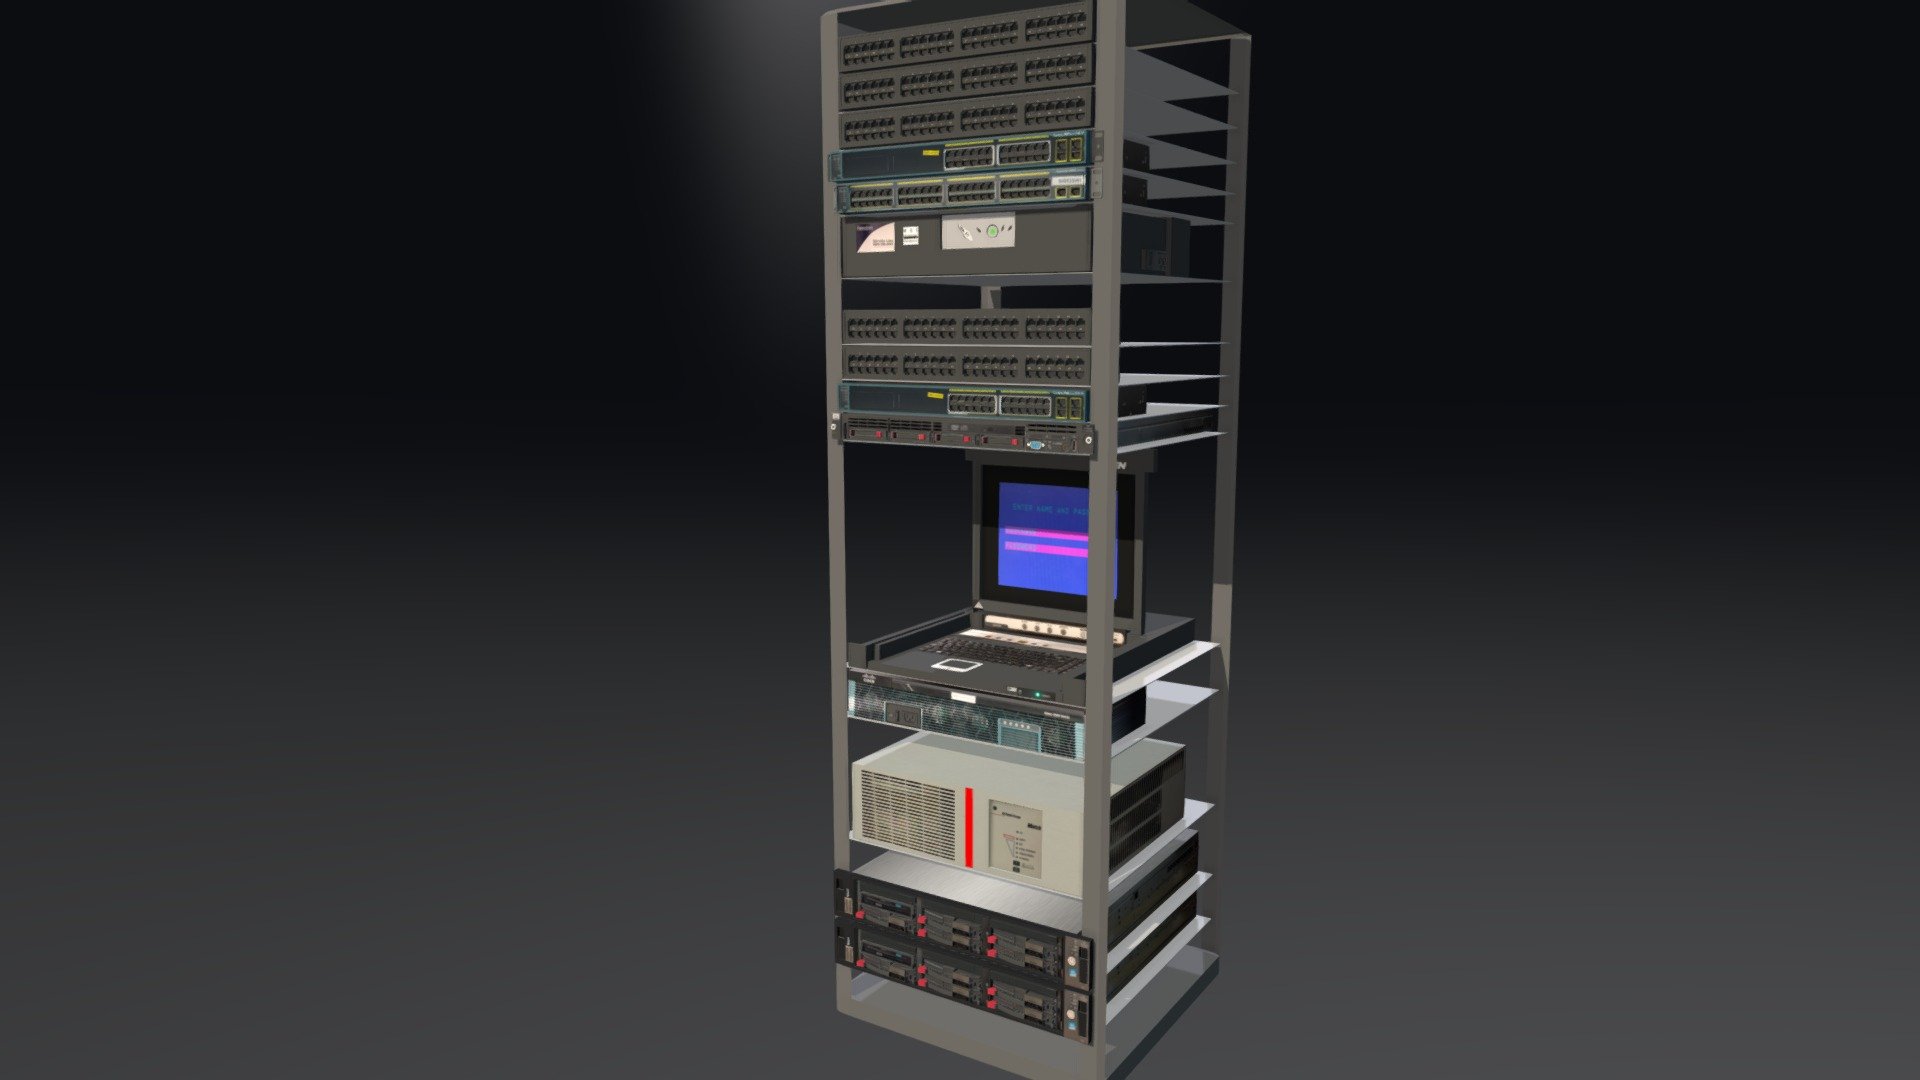 A collection of the hardware i have been modelling so far :D
Also i forget to mention this was all done in blender !

dont forget hd textures! - Server Cabinet test - Argos - Download Free 3D model by gav.grant 3d model